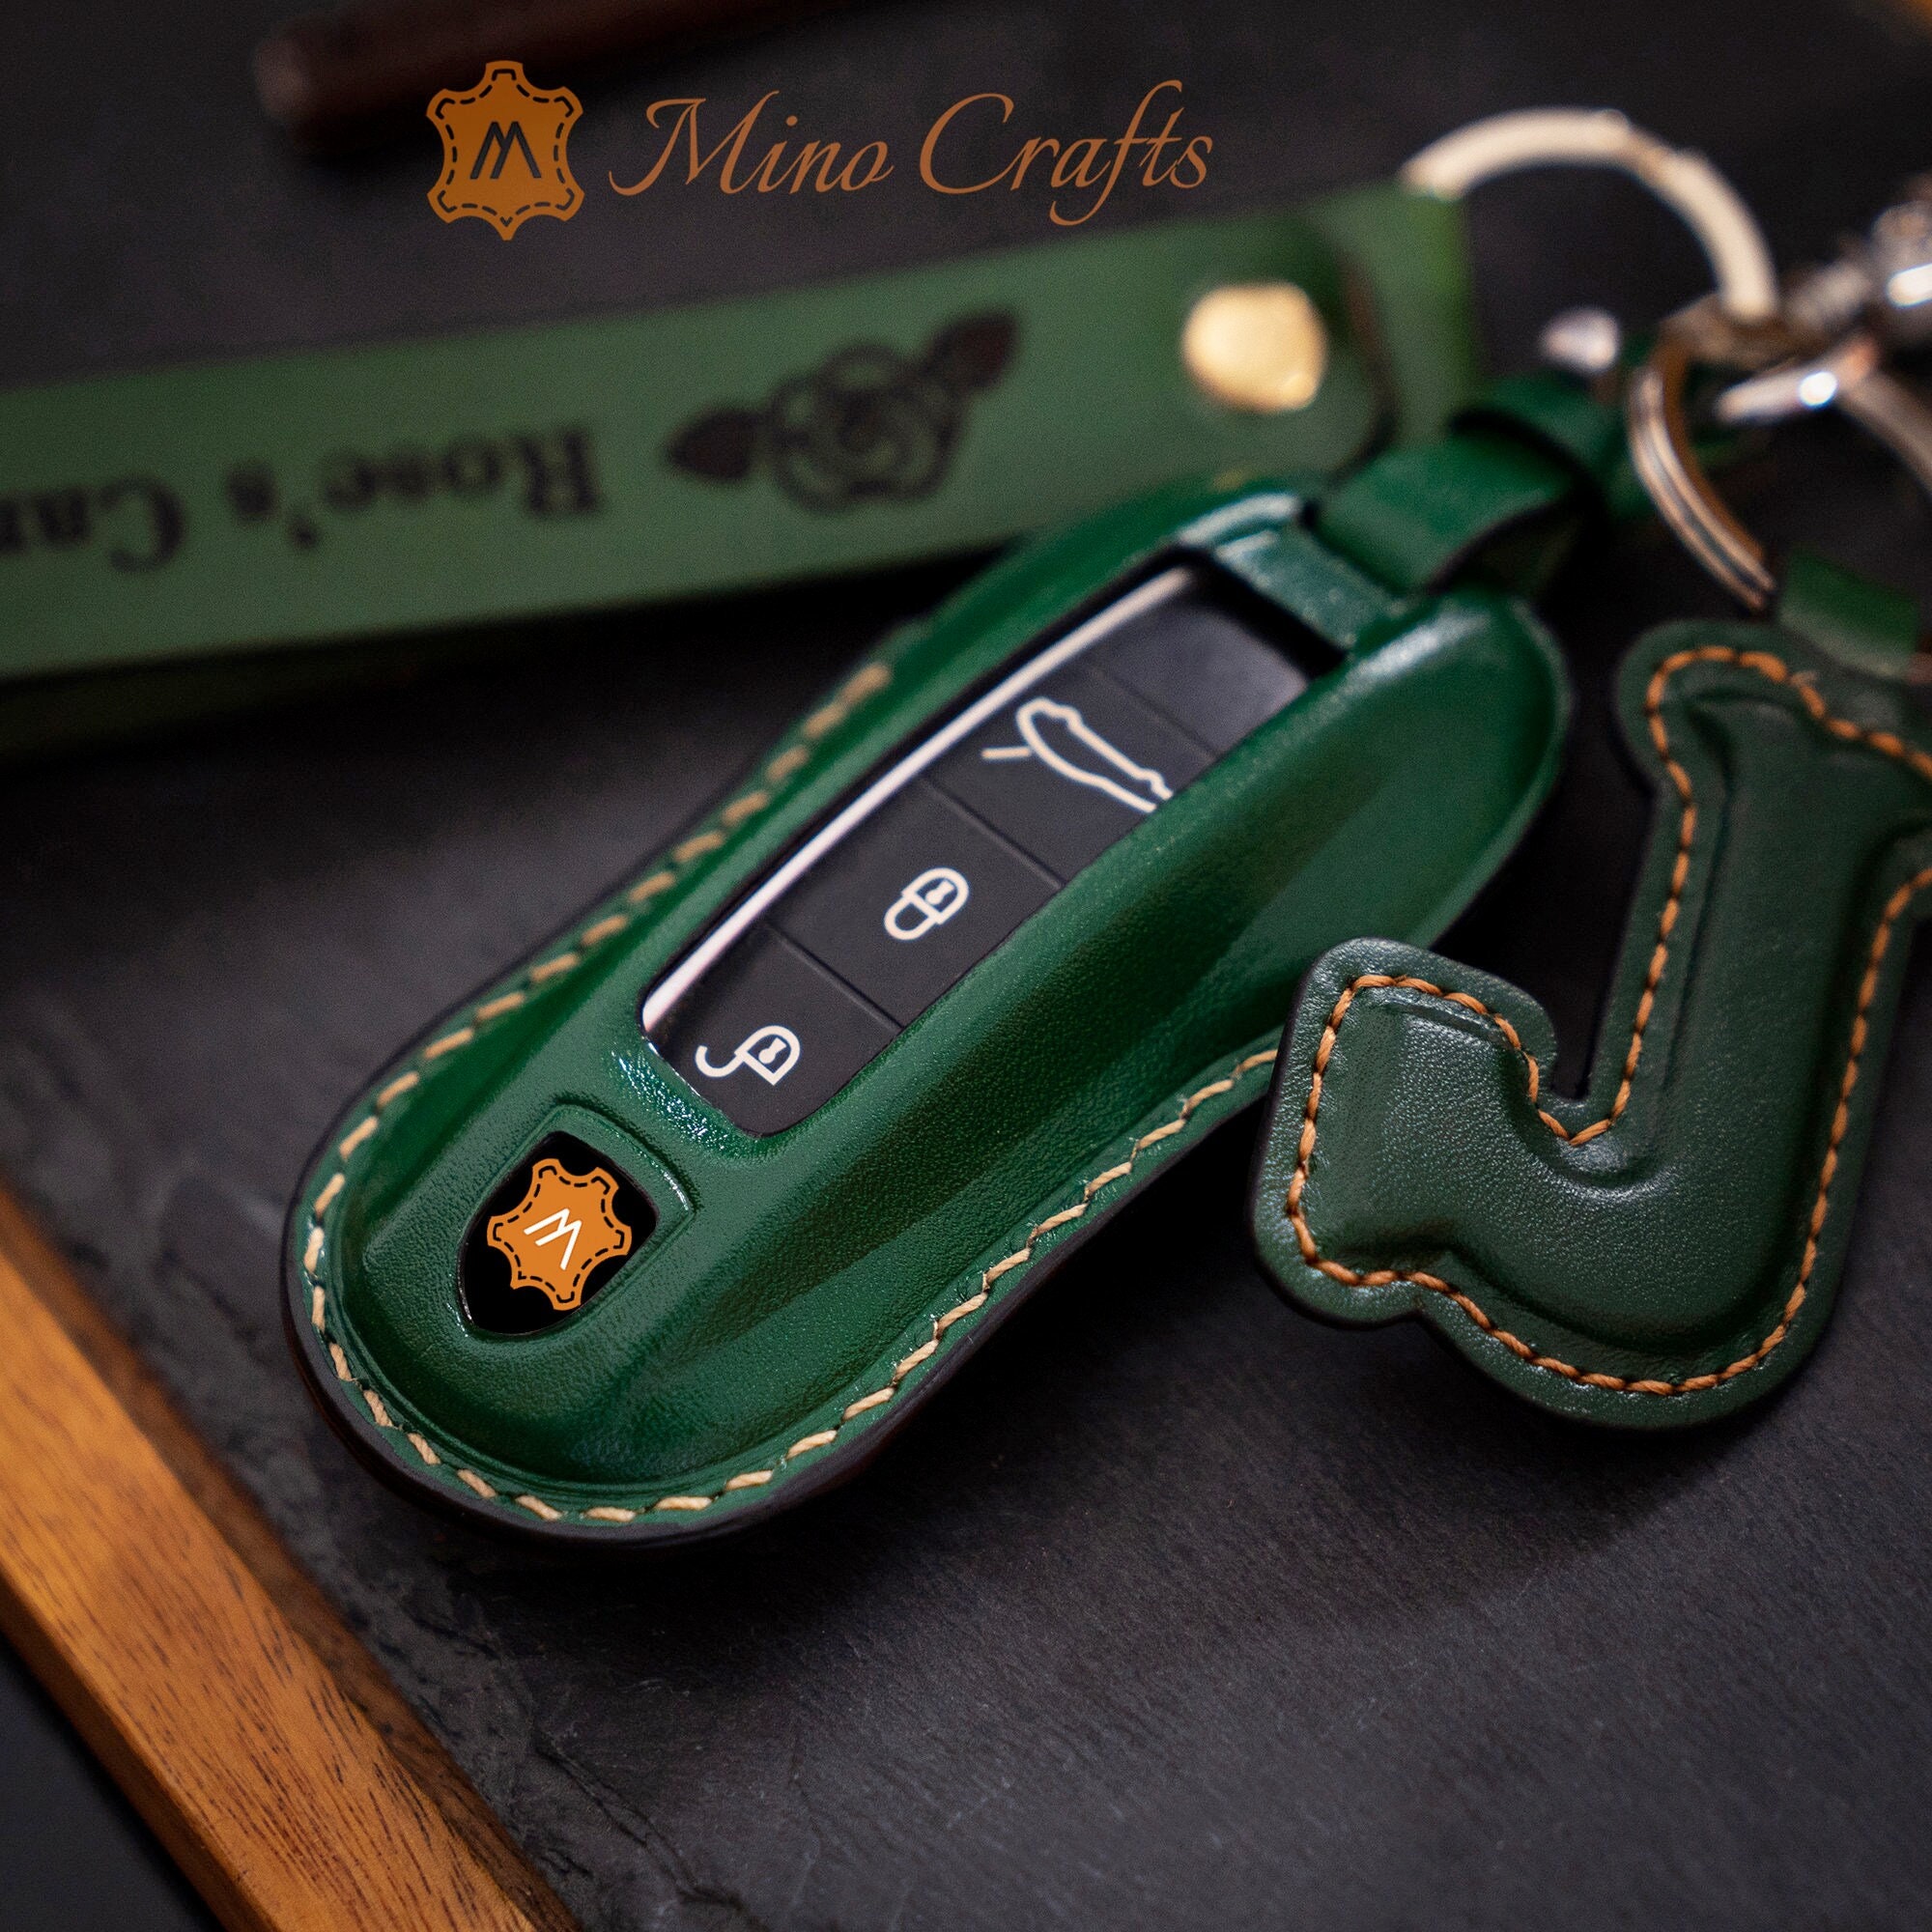 Tiffany and Co. Gold and Enamel Porsche Key Ring at 1stDibs  porsche  keychain vintage, vintage porsche keychain, gold porsche keychain